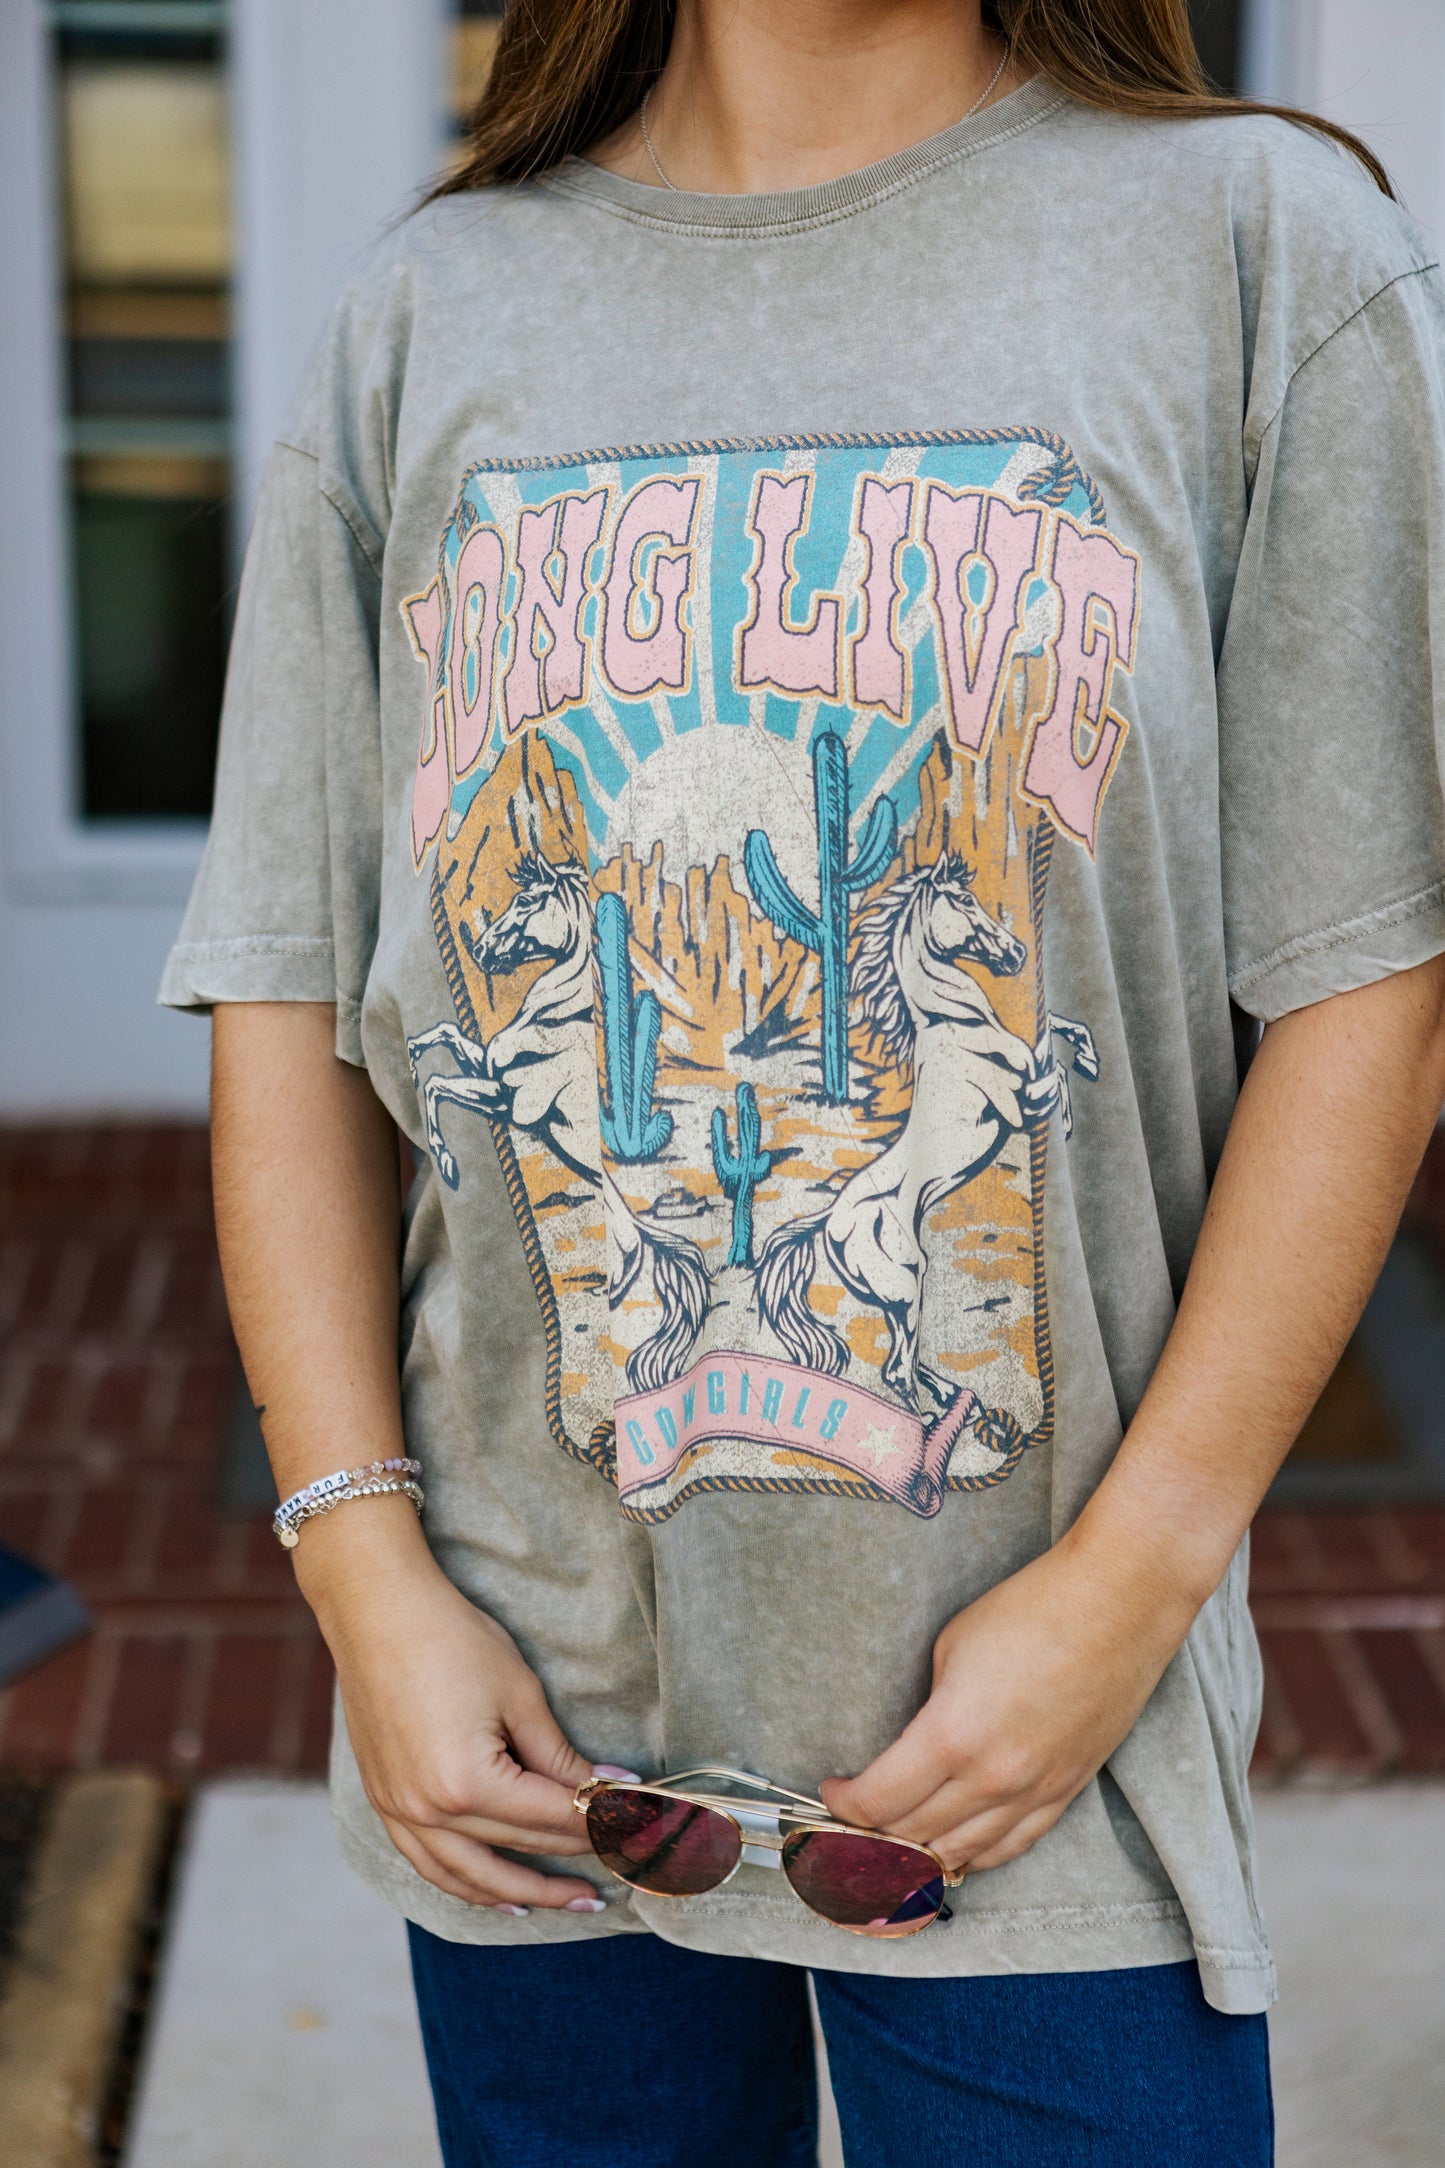 LONG LIVE COWGIRLS GRAPHIC TEE